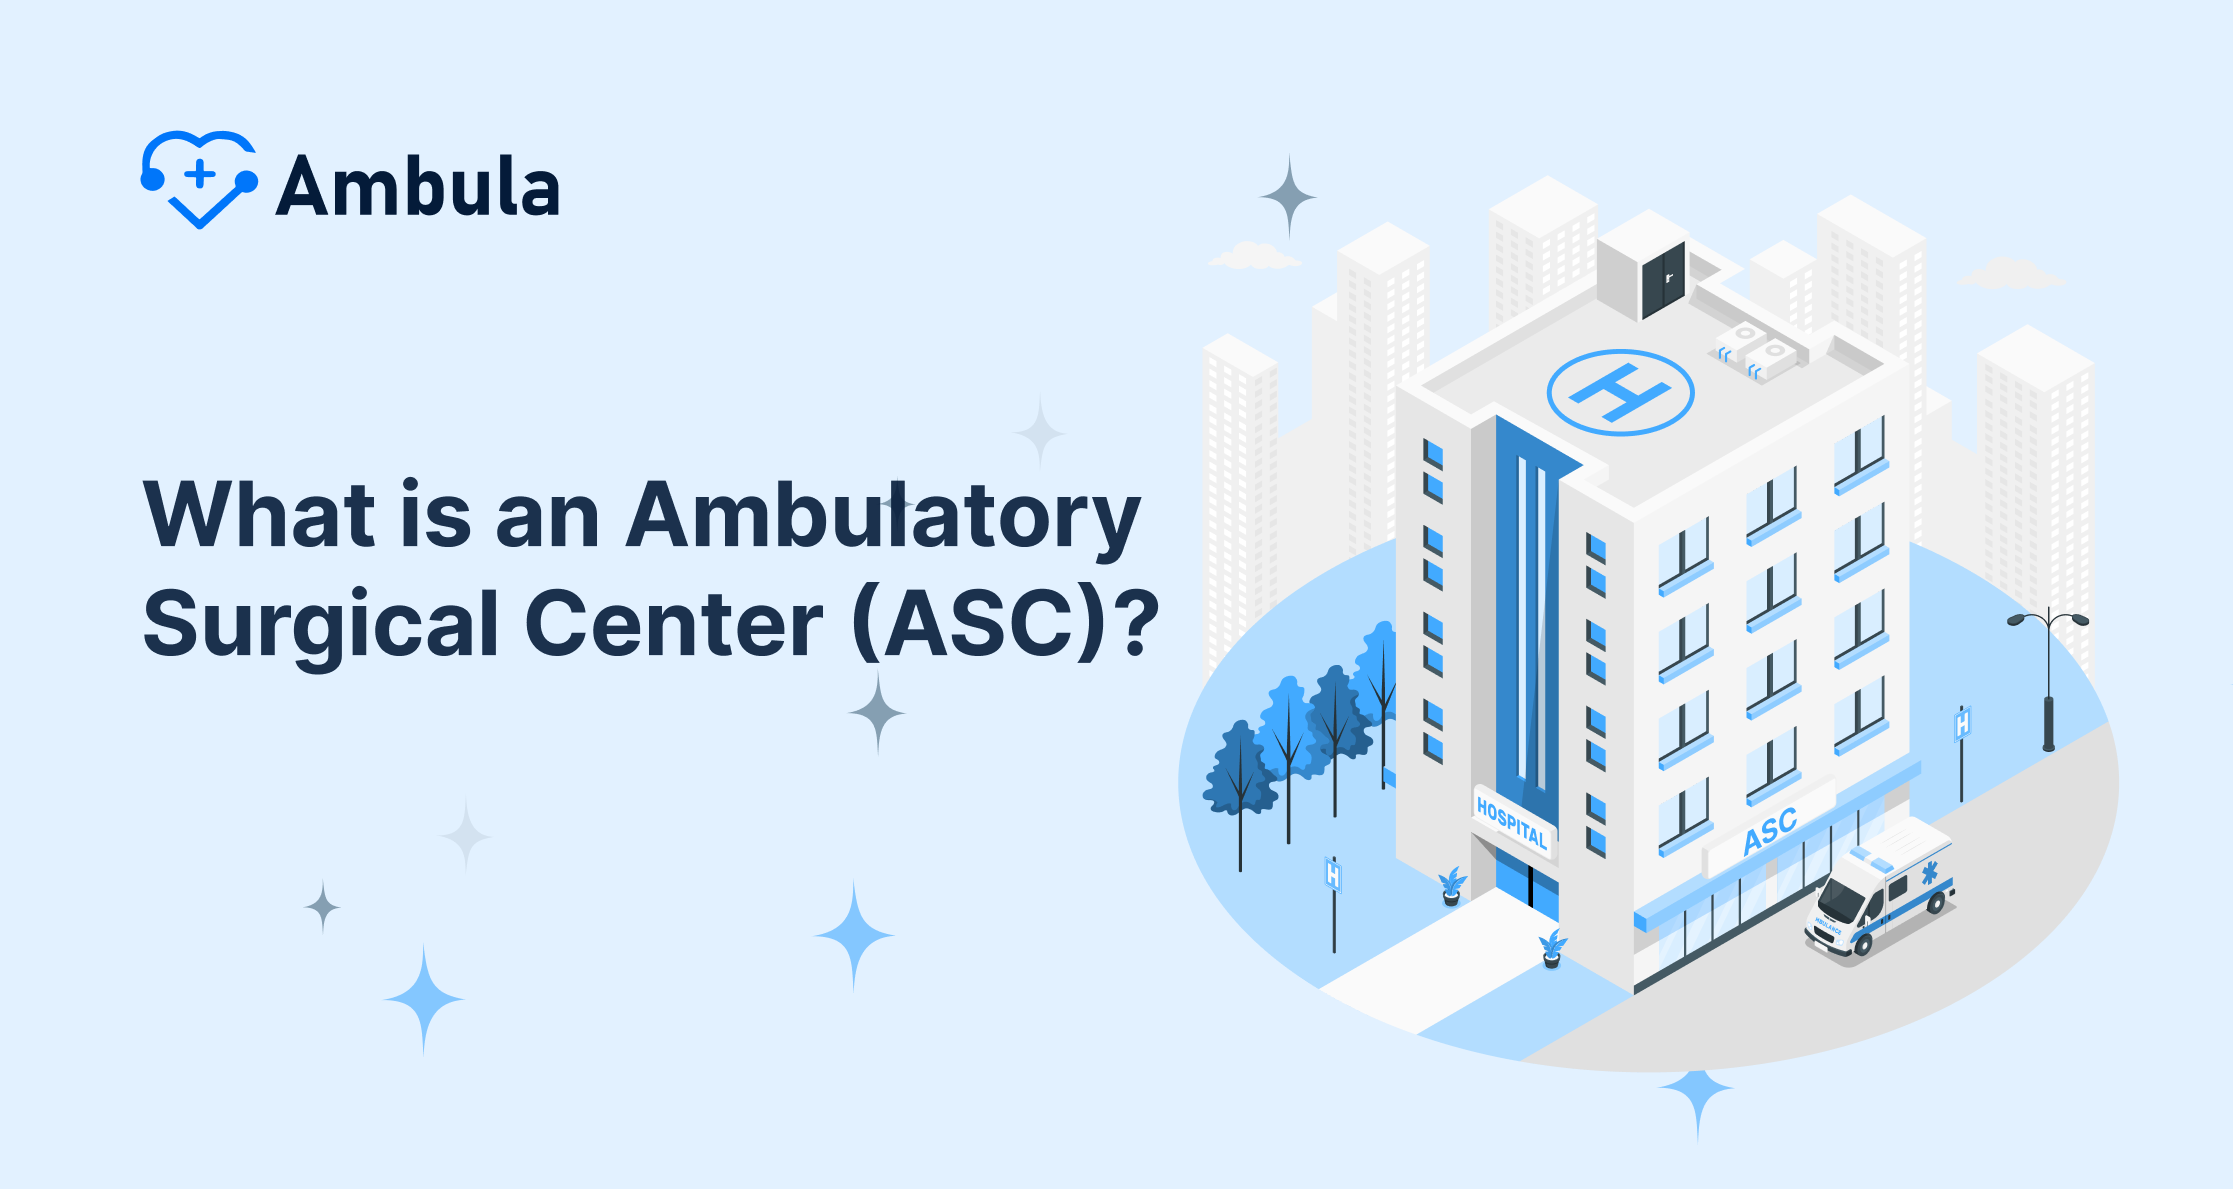 What is an Ambulatory Surgical Center (ASC)?